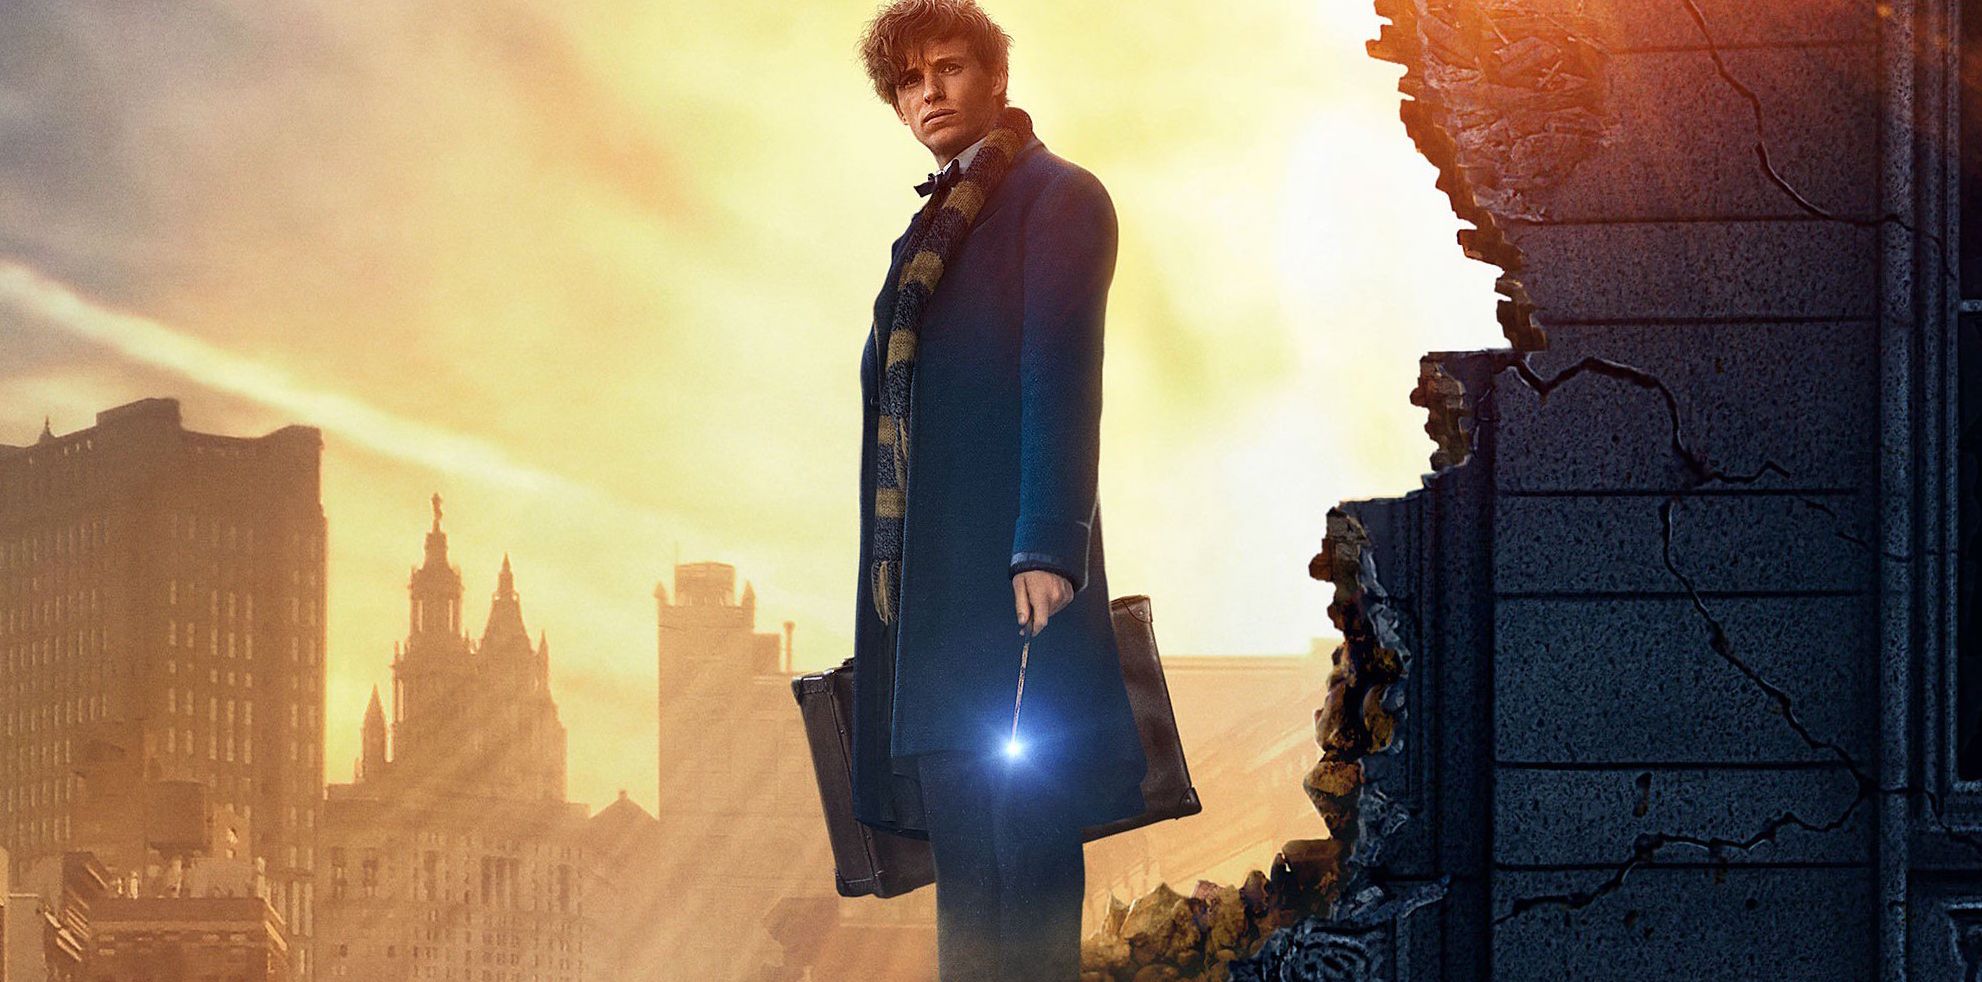 Fantastic Beasts And Where To Find Them 2016 Online Film Watch